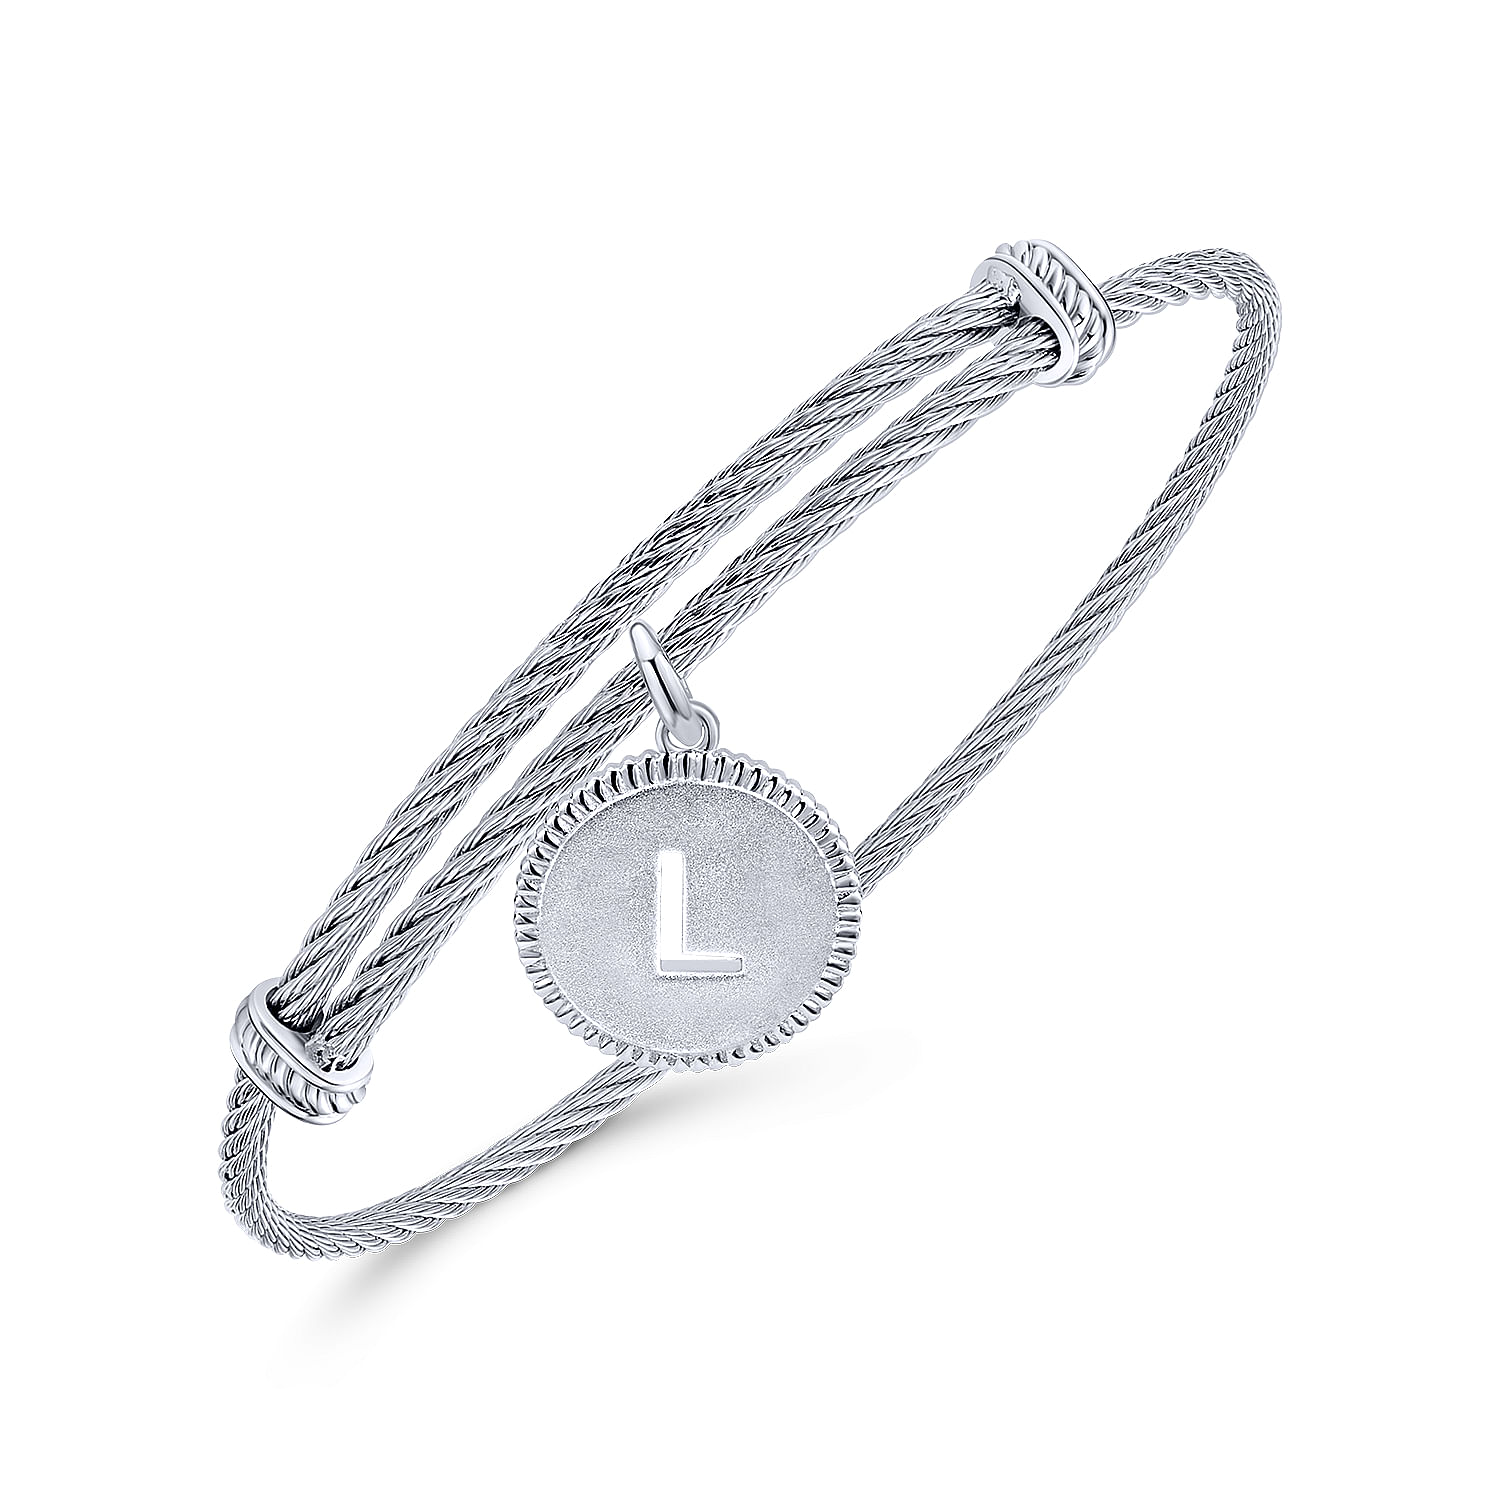 Adjustable Twisted Cable Stainless Steel Bangle with Sterling Silver L Initial Charm